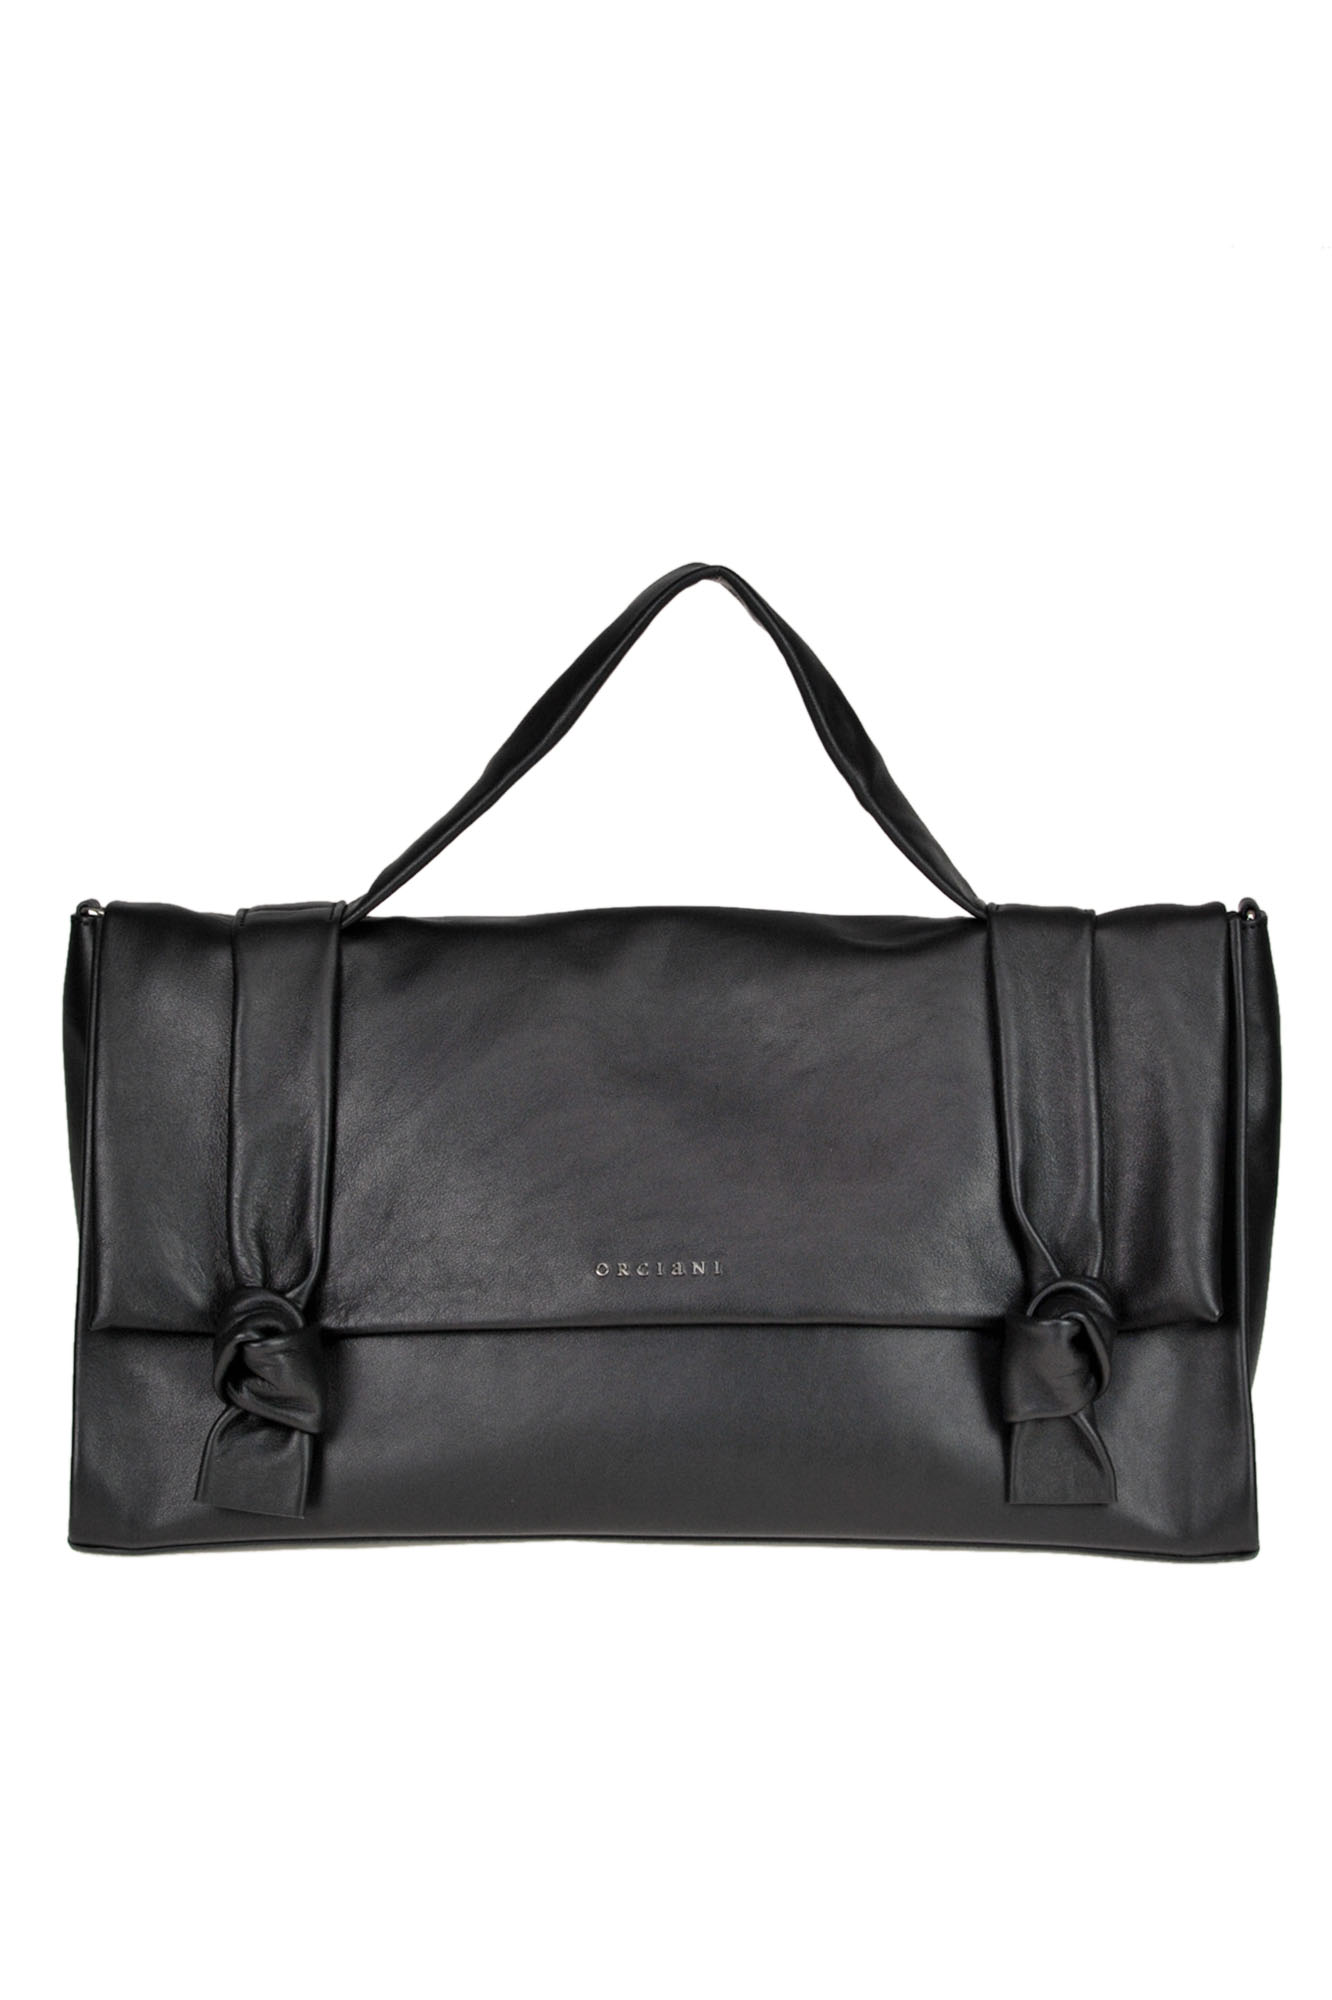 Orciani 'bella' Leather Bag In Black